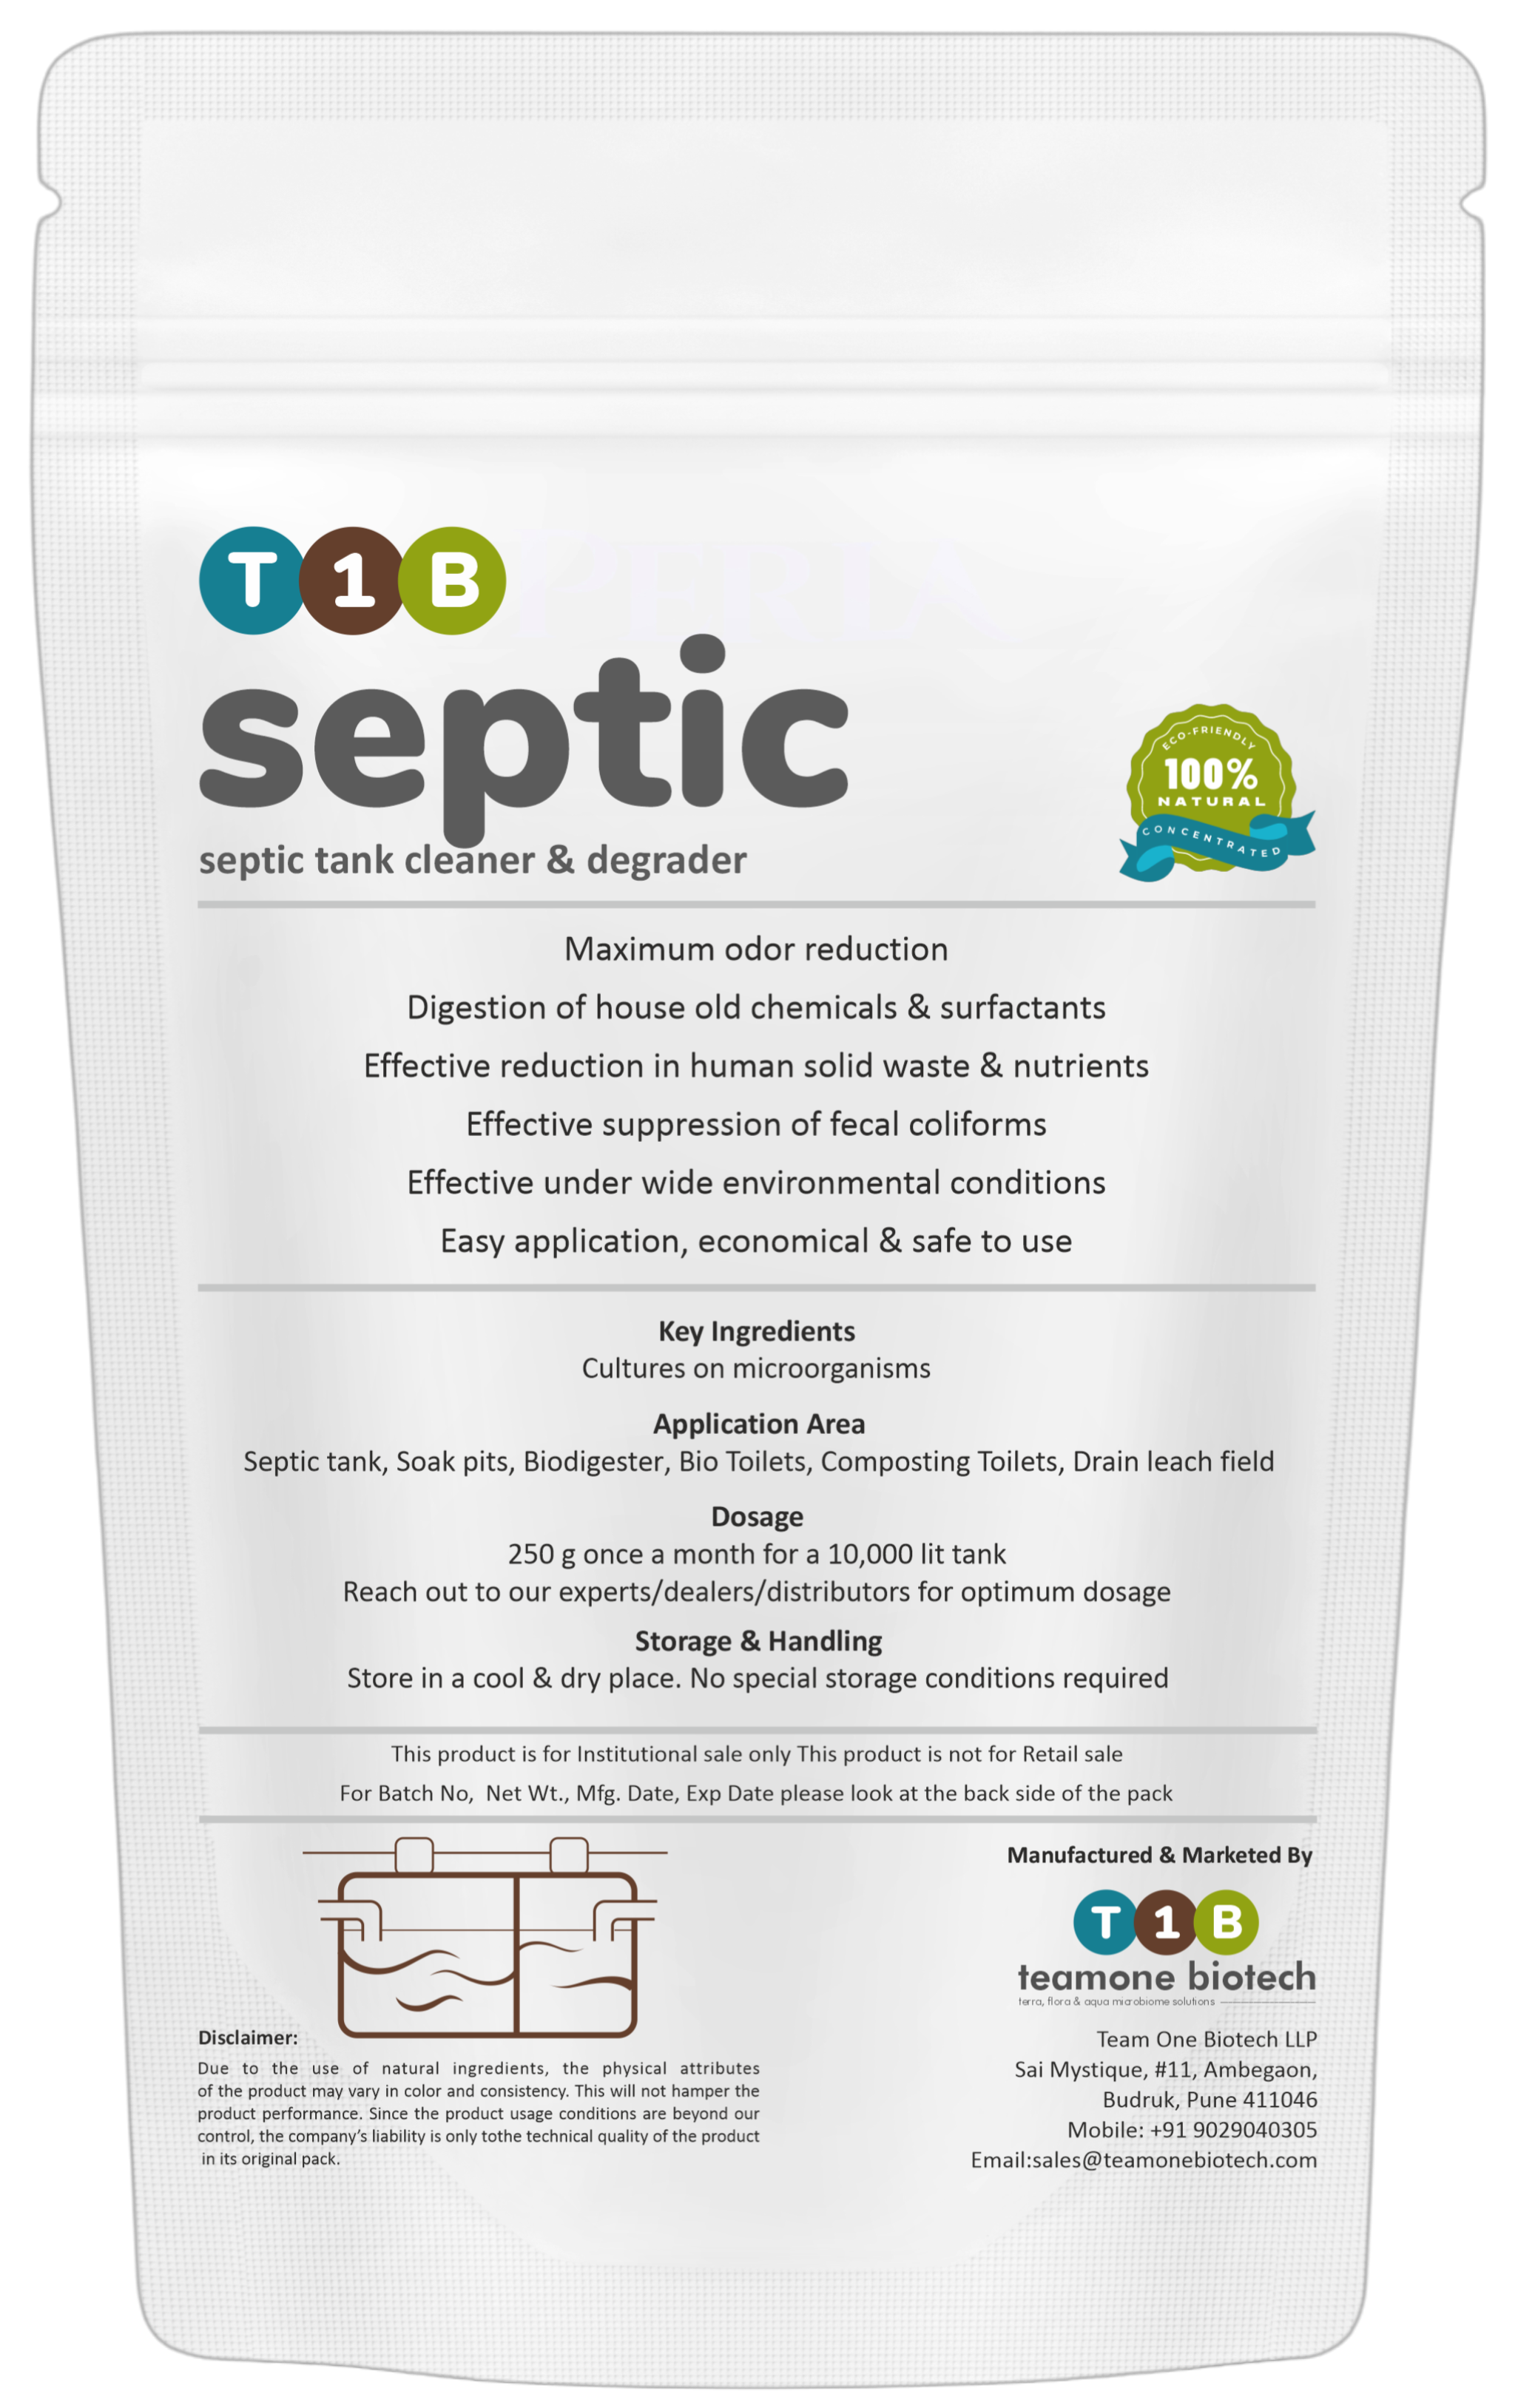 Microbial consortia for fecal sludge degradation in septic tanks